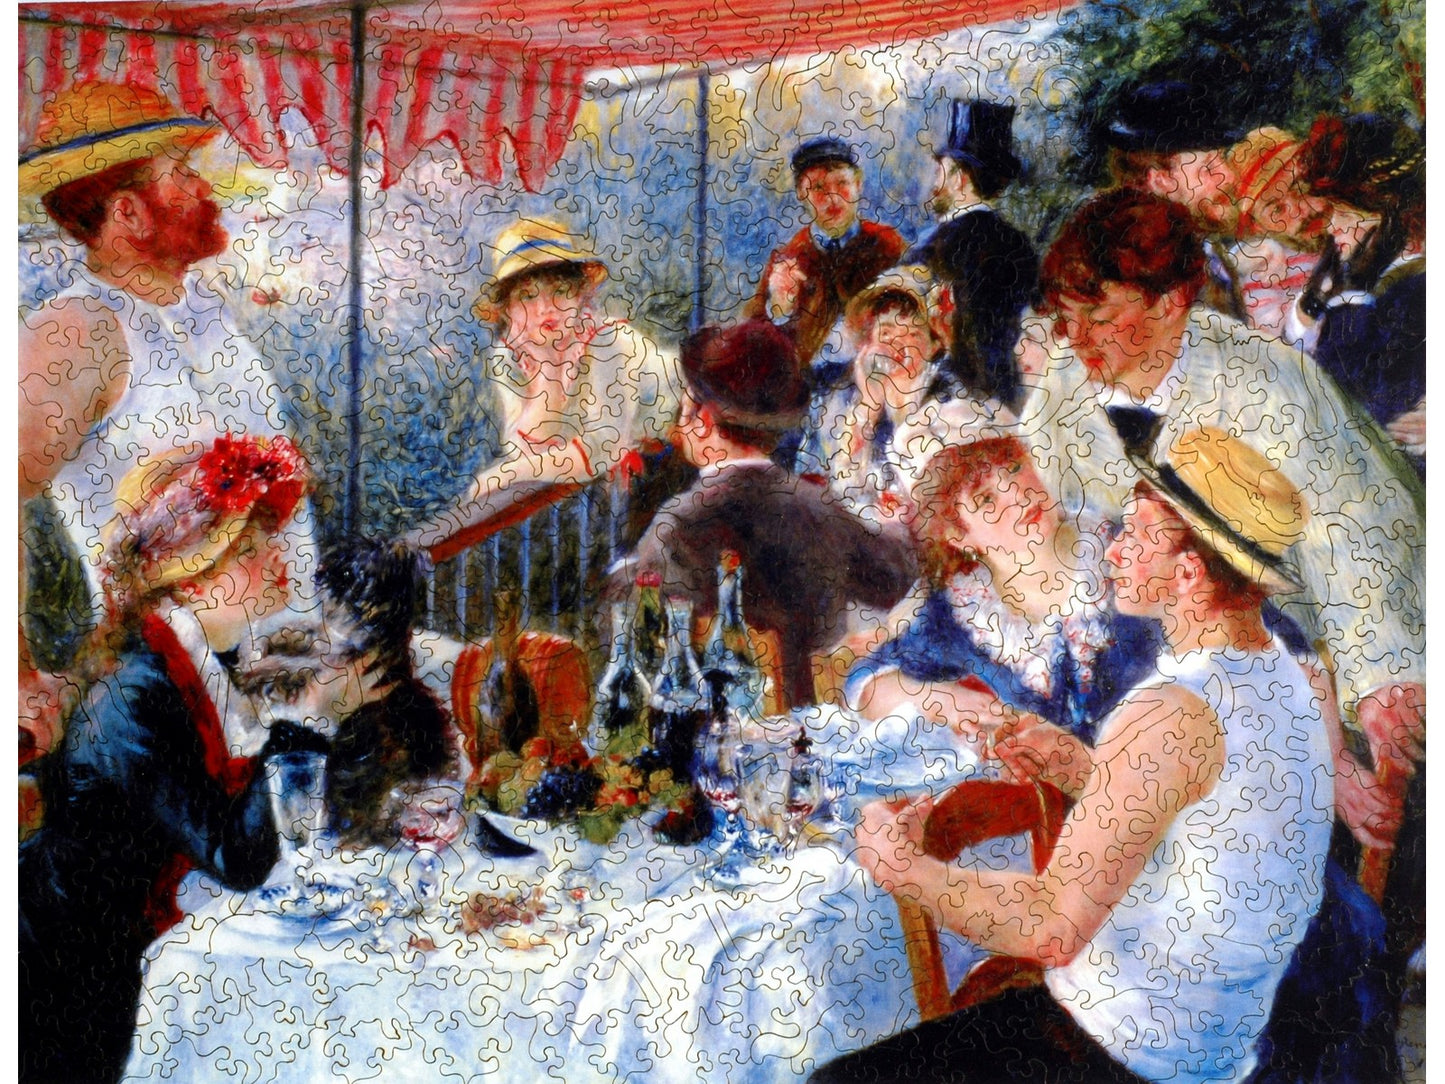 The front of the puzzle, Luncheon of the Boating Party, which shows a group of people around a table in a cafe.